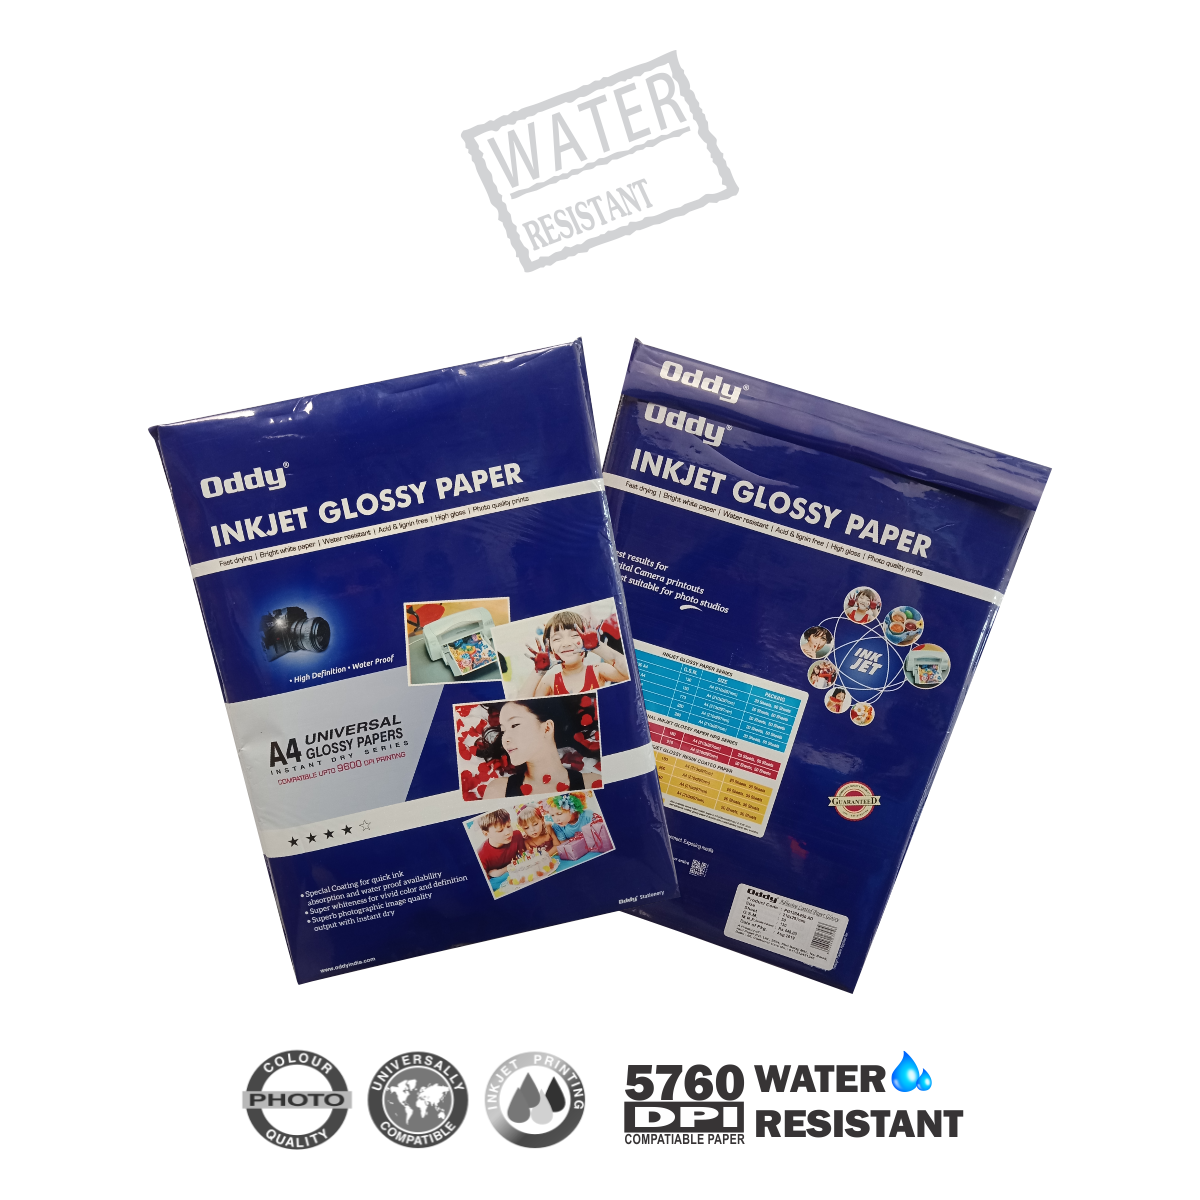 Coated Glossy Paper by Oddy